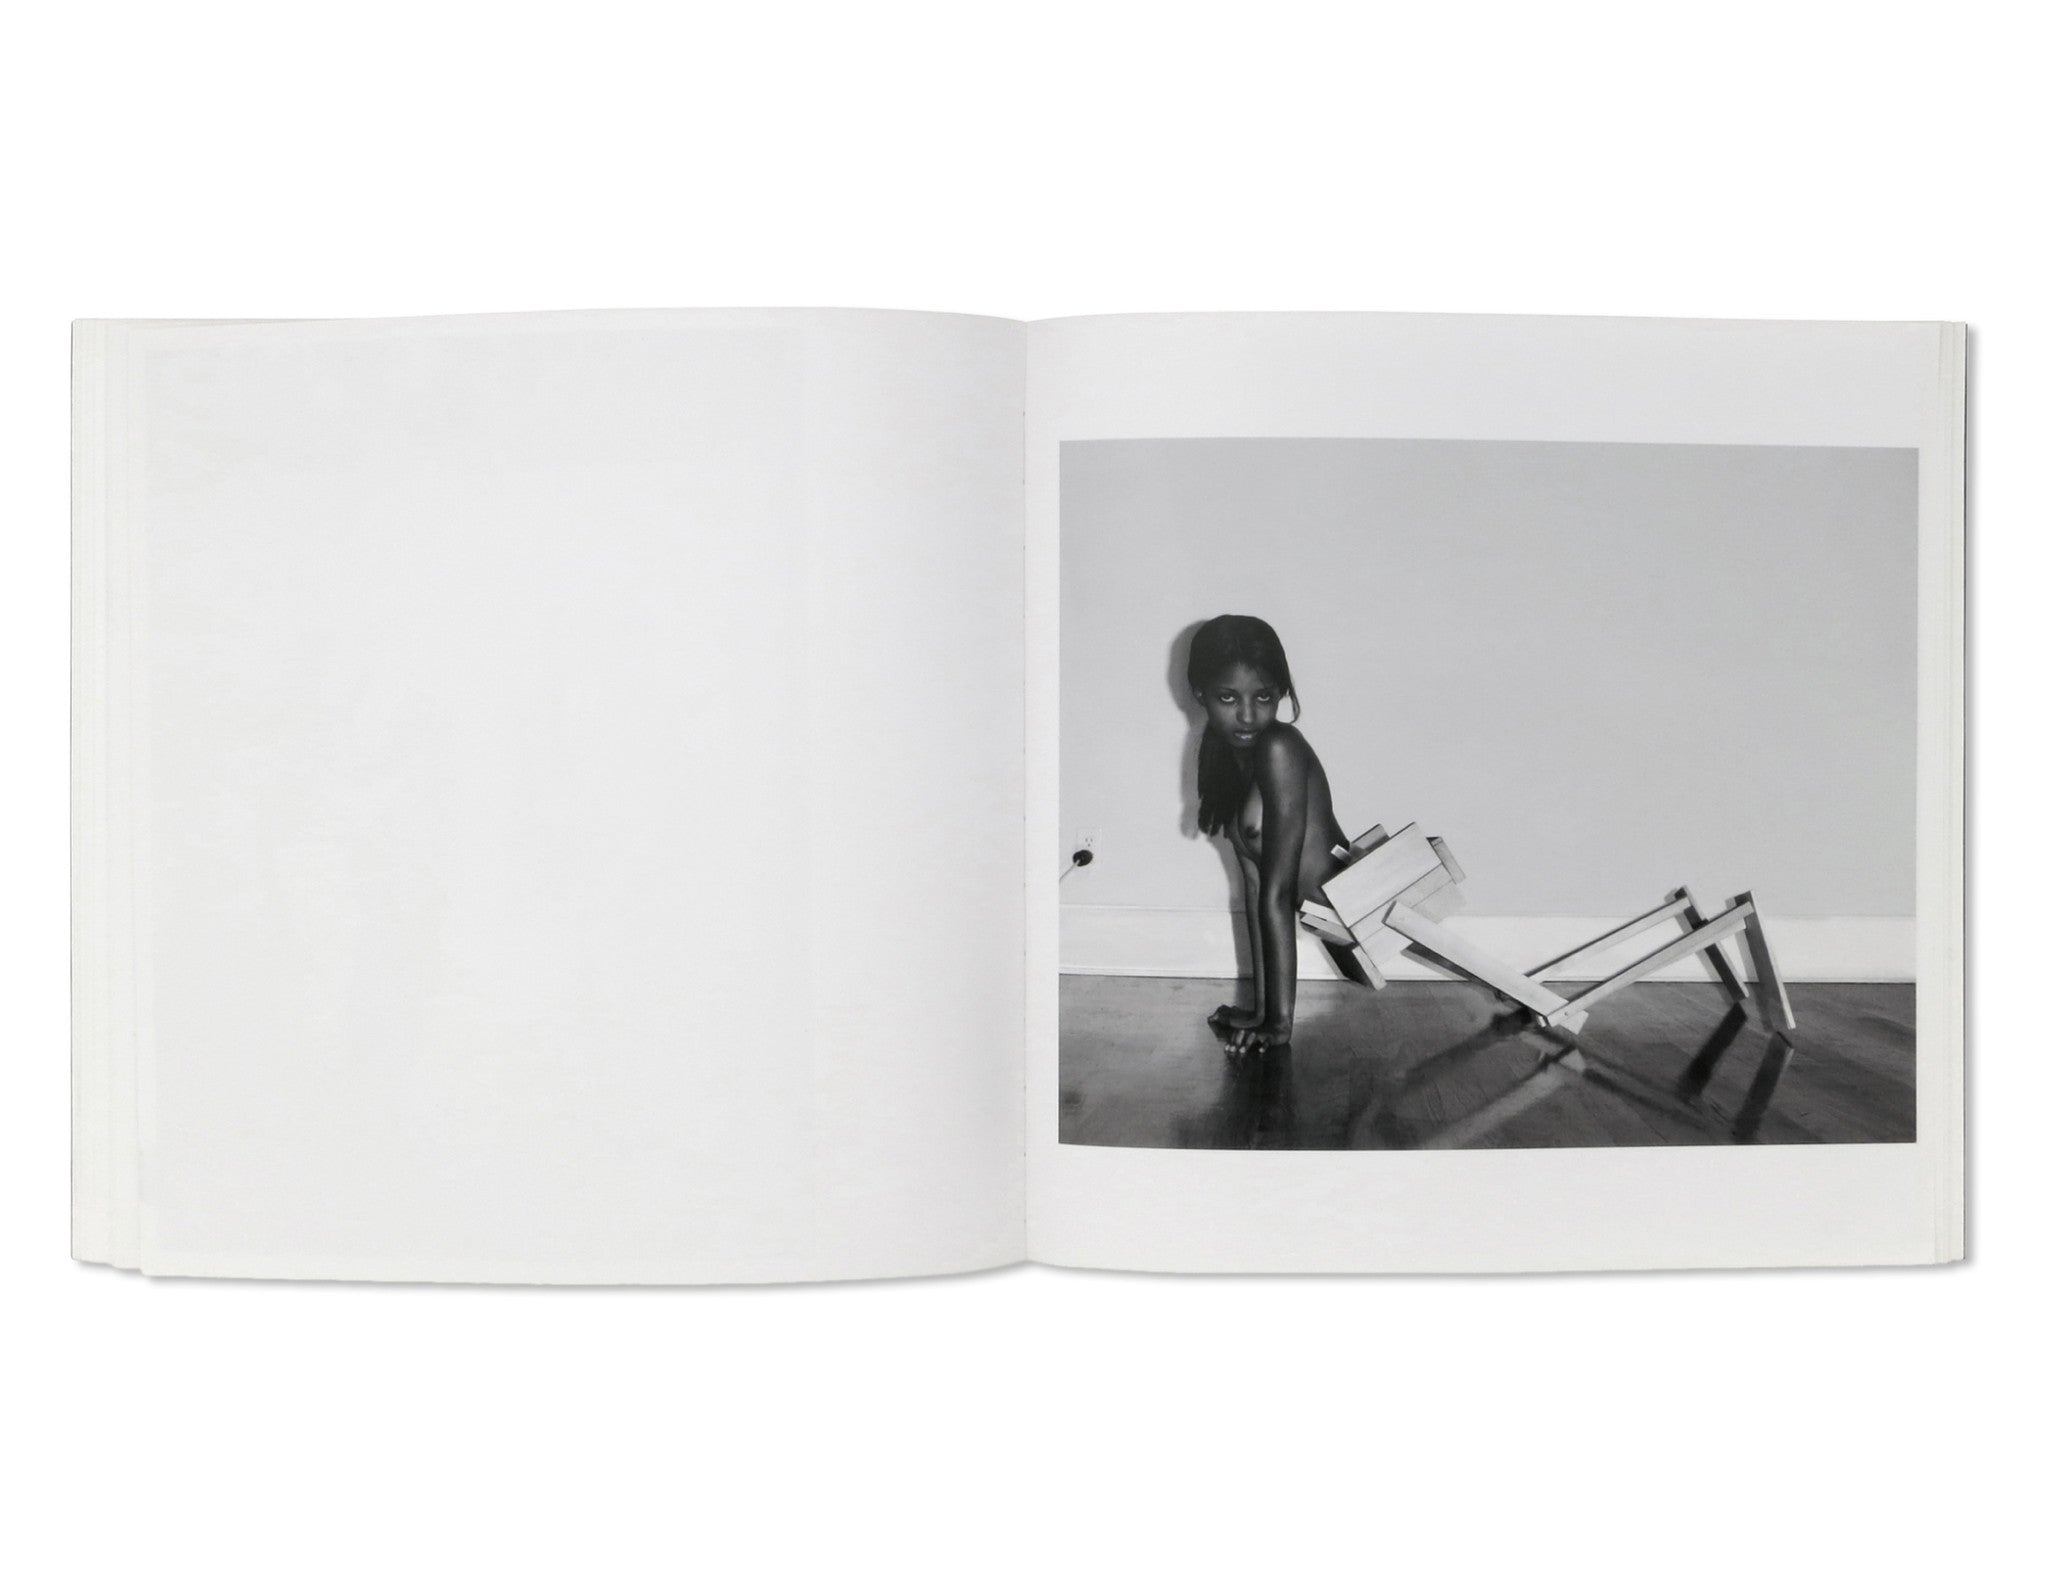 WRONG by Asger Carlsen [SIGNED]